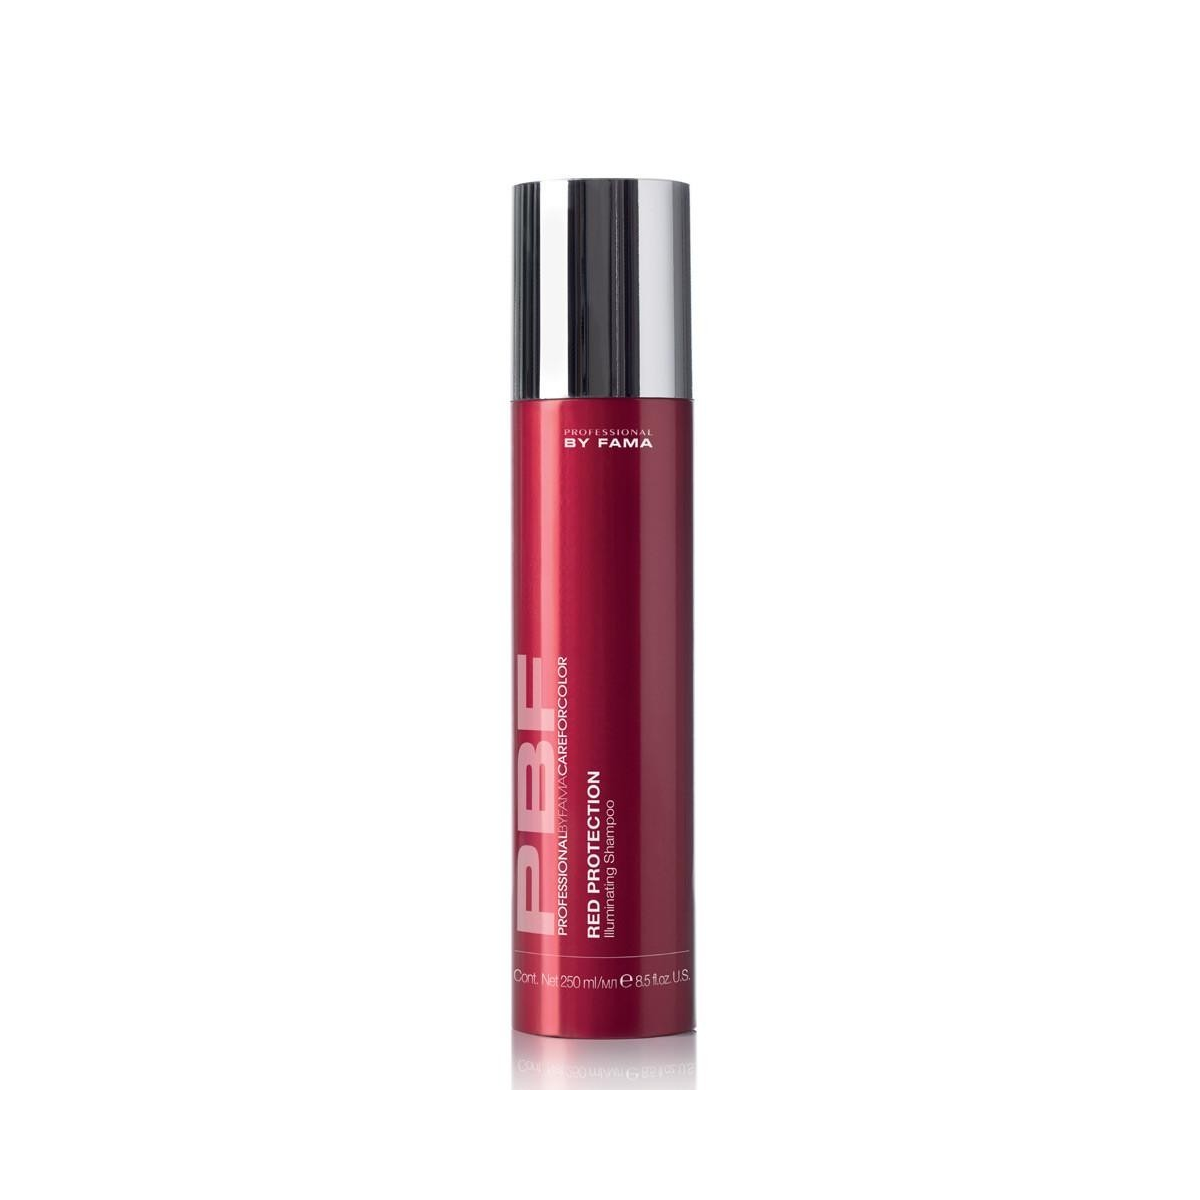 PROFESSIONAL BY FAMA - CARE FOR COLOR - RED PROTECTION - ILLUMINATING (250ml) Shampoo